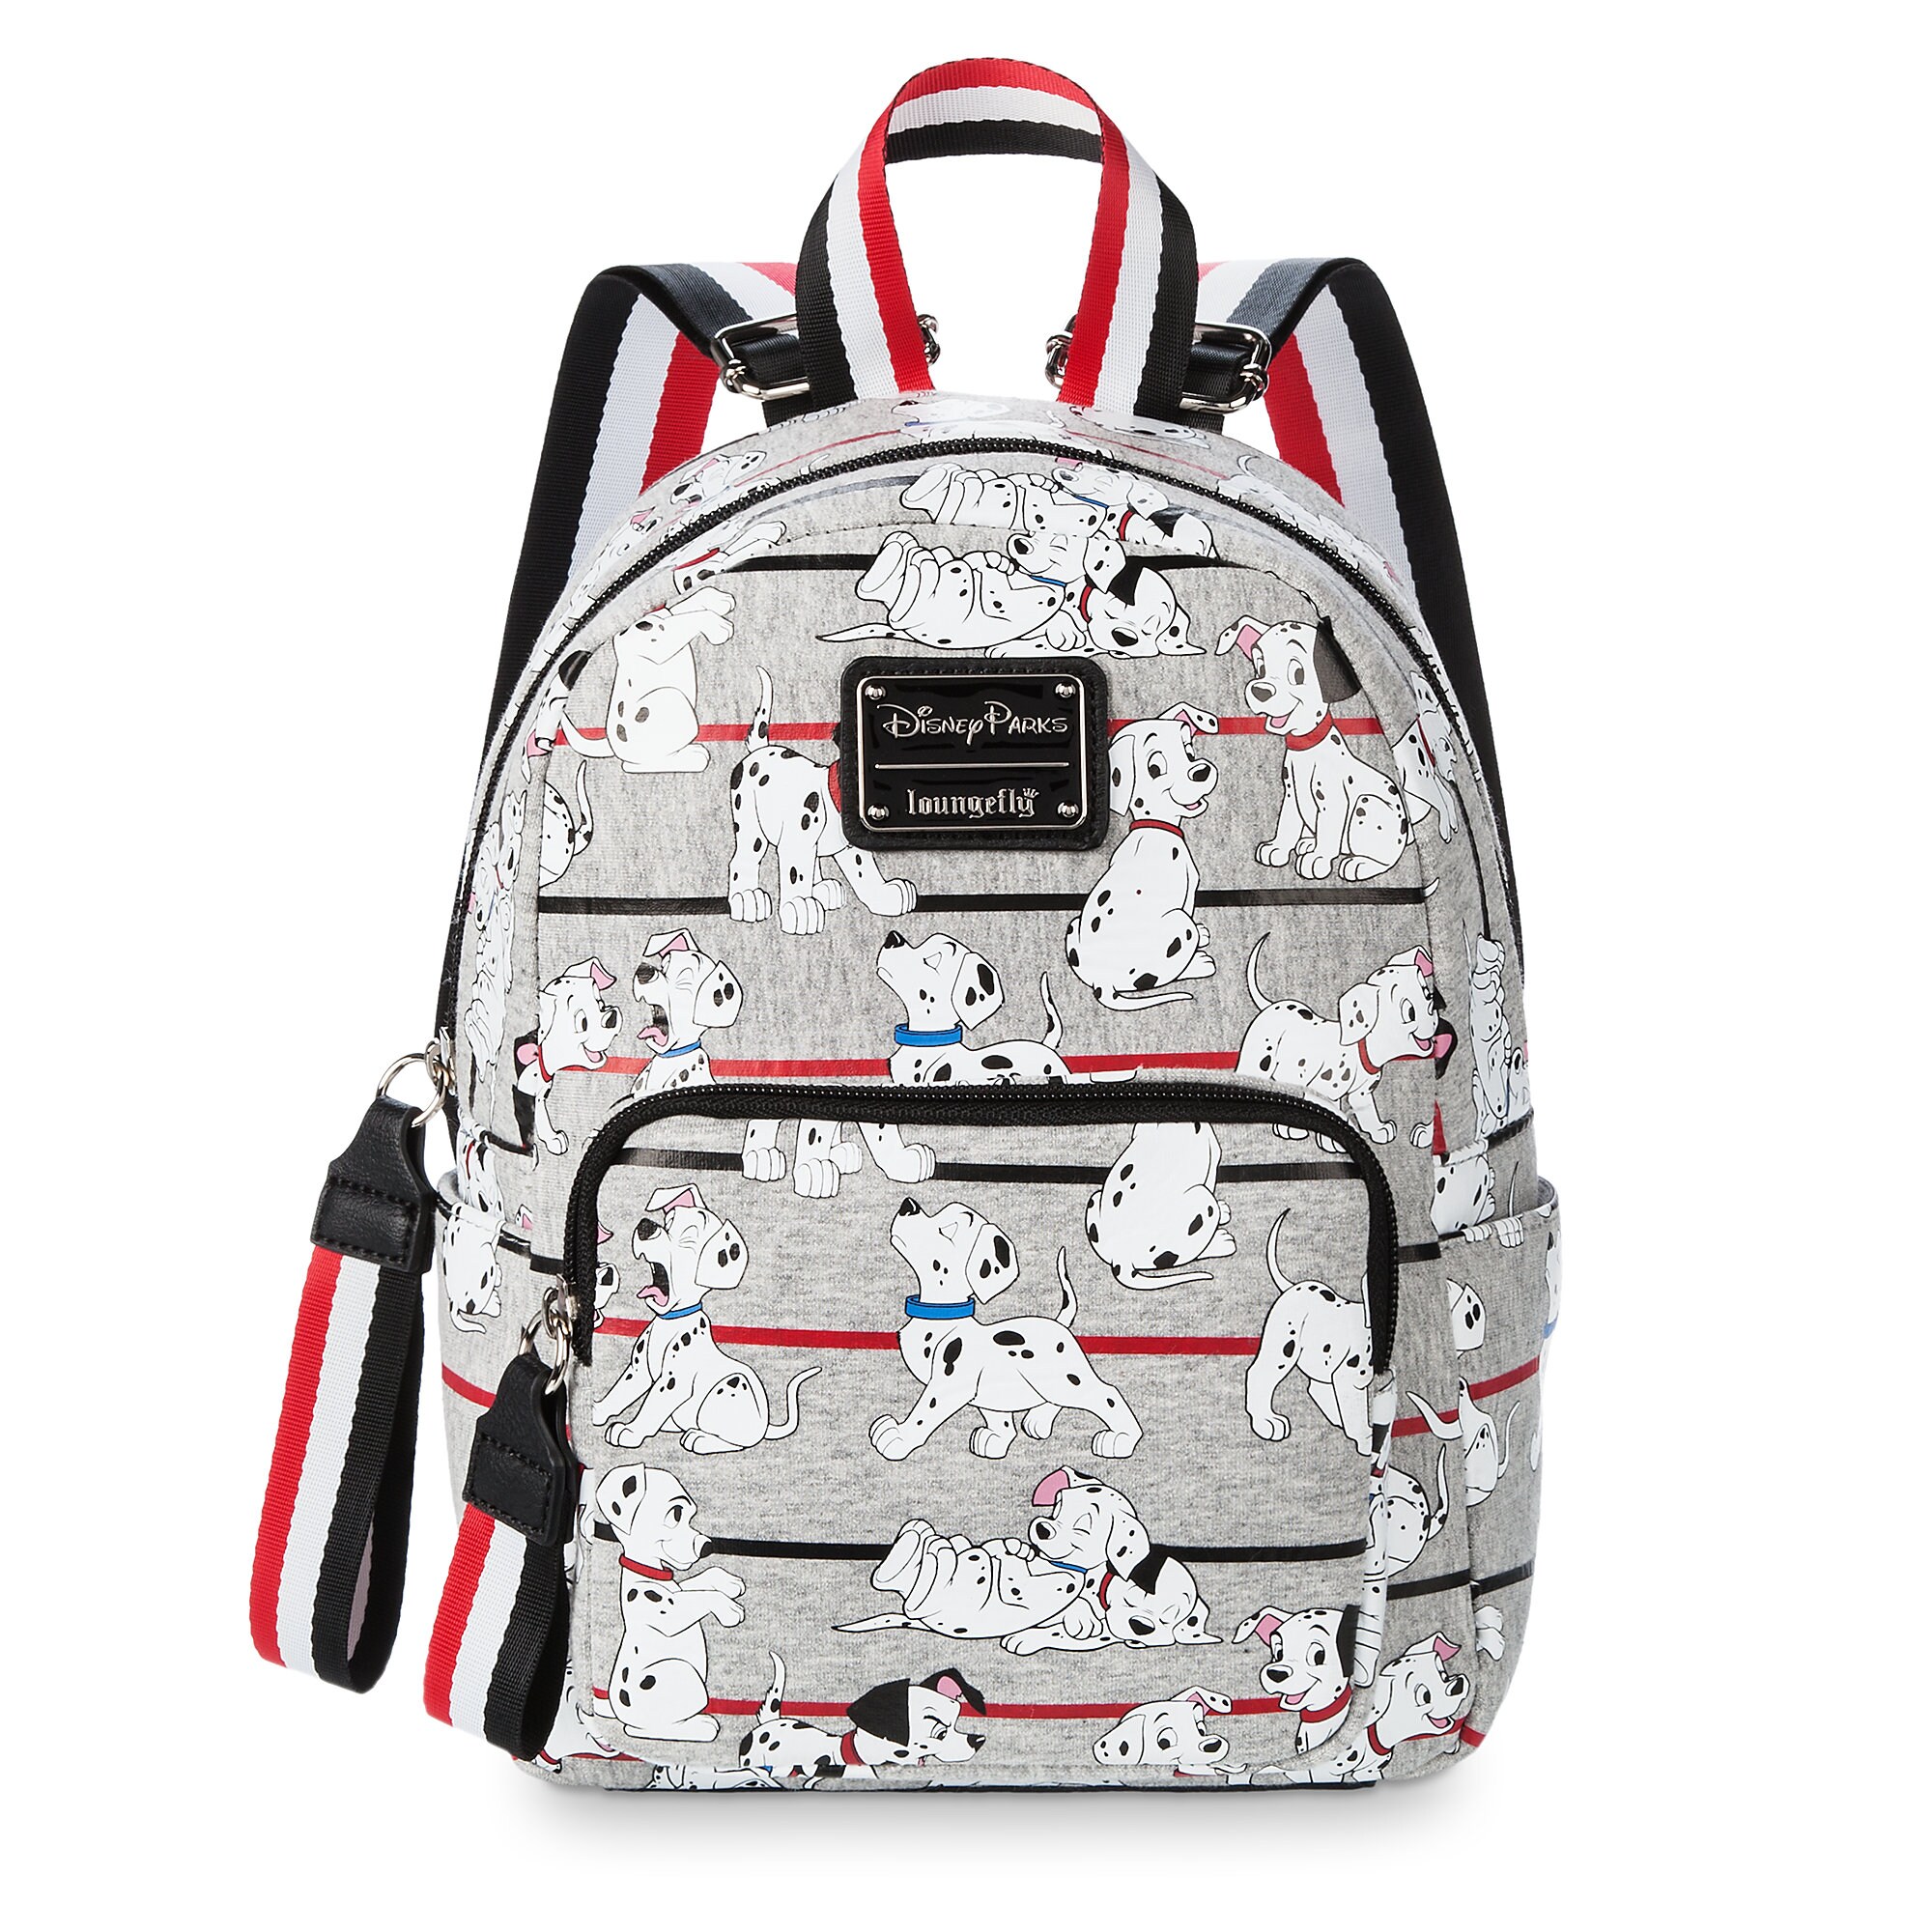 101 Dalmatians Mini Backpack by Loungefly